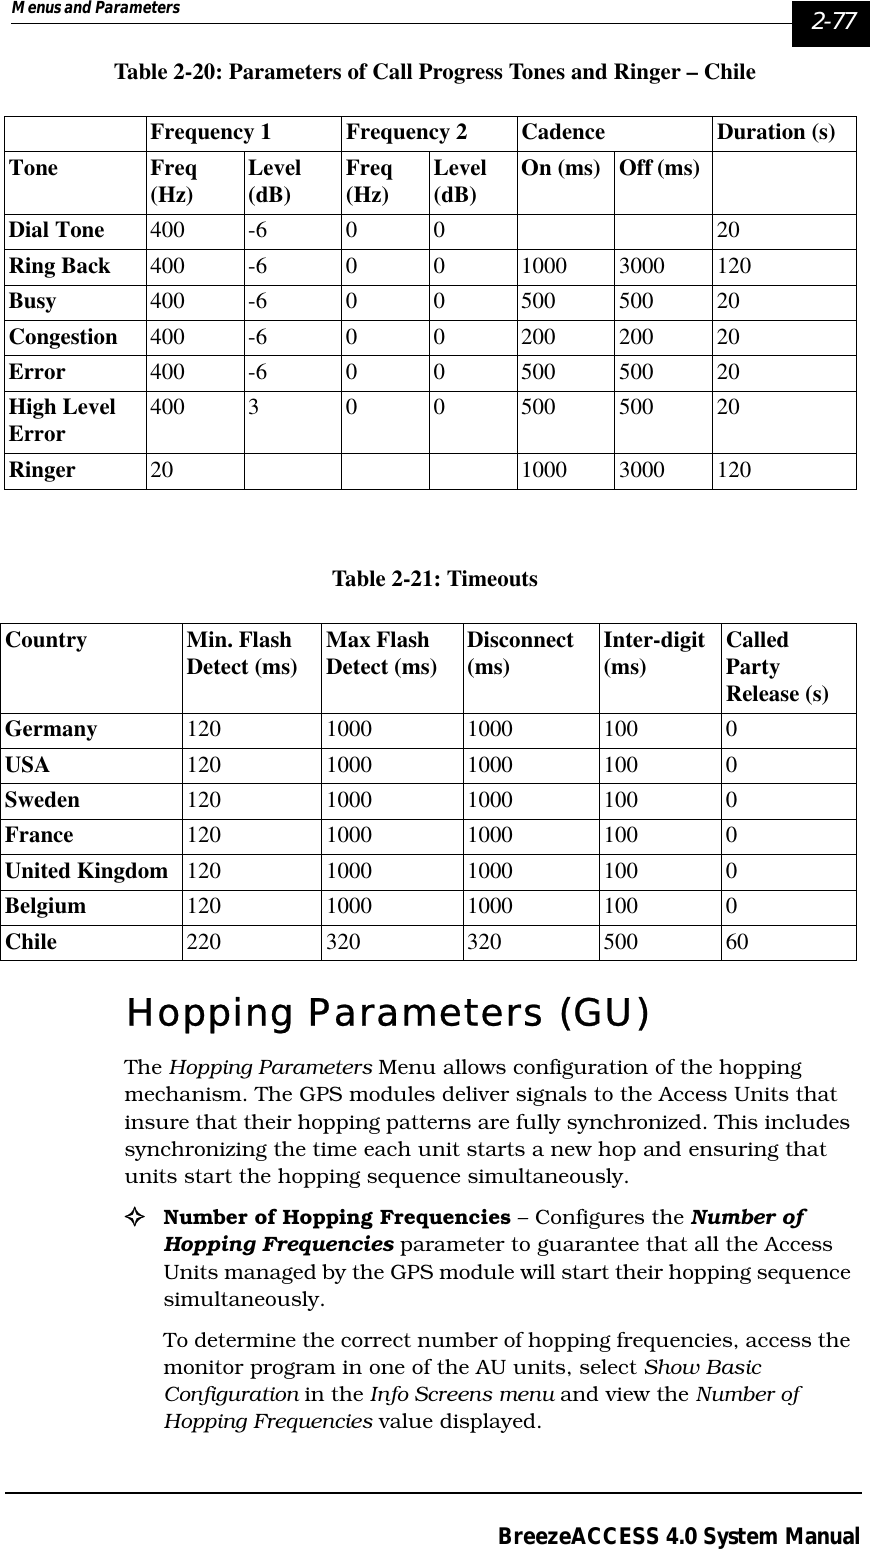 Menus and Parameters   2-77BreezeACCESS 4.0 System ManualTable 2-20: Parameters of Call Progress Tones and Ringer – ChileTable 2-21: TimeoutsHopping Parameters (GU)The Hopping Parameters Menu allows configuration of the hopping mechanism. The GPS modules deliver signals to the Access Units that insure that their hopping patterns are fully synchronized. This includes synchronizing the time each unit starts a new hop and ensuring that units start the hopping sequence simultaneously.!Number of Hopping Frequencies – Configures the Number of Hopping Frequencies parameter to guarantee that all the Access Units managed by the GPS module will start their hopping sequence simultaneously. To determine the correct number of hopping frequencies, access the monitor program in one of the AU units, select Show Basic Configuration in the Info Screens menu and view the Number of Hopping Frequencies value displayed.Frequency 1 Frequency 2 Cadence Duration (s)Tone Freq (Hz) Level (dB) Freq (Hz) Level (dB) On (ms) Off (ms)Dial Tone 400 -6 0 0 20Ring Back 400 -6 0 0 1000 3000 120Busy 400 -6 0 0 500 500 20 Congestion 400 -6 0 0 200 200 20Error 400 -6 0 0 500 500 20High Level Error 400 3 0 0 500 500 20Ringer 20 1000 3000 120Country Min. Flash Detect (ms) Max Flash Detect (ms) Disconnect (ms) Inter-digit (ms) Called Party Release (s)Germany 120 1000 1000 100 0USA 120 1000 1000 100 0Sweden 120 1000 1000 100 0France 120 1000 1000 100 0United Kingdom 120 1000 1000 100 0Belgium 120 1000 1000 100 0Chile 220 320 320 500 60